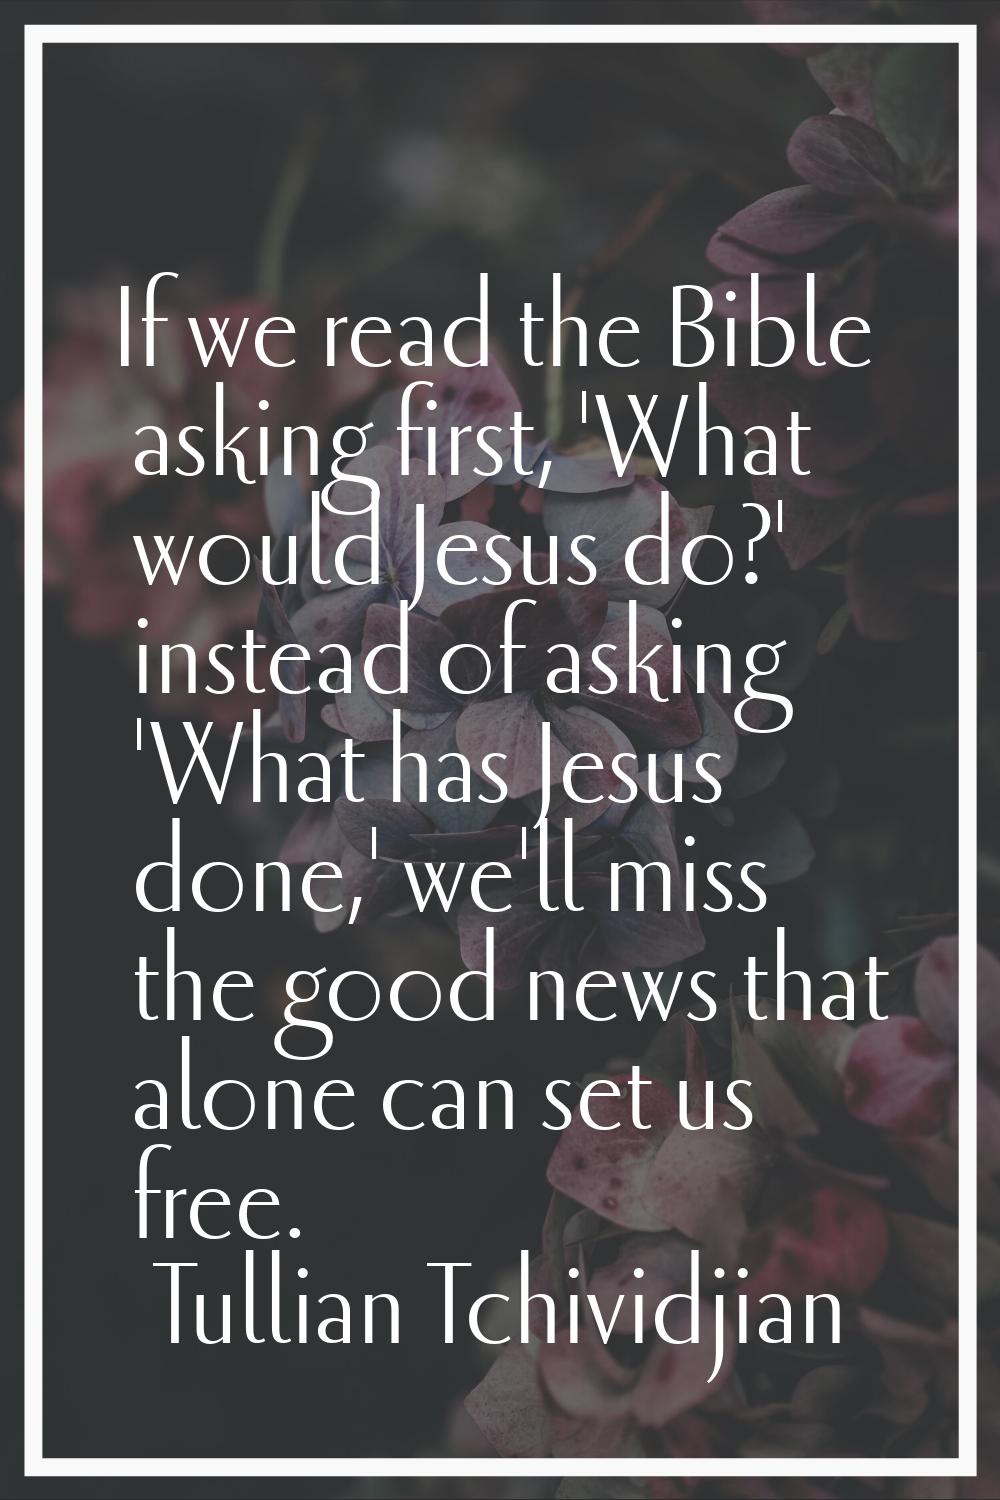 If we read the Bible asking first, 'What would Jesus do?' instead of asking 'What has Jesus done,' 